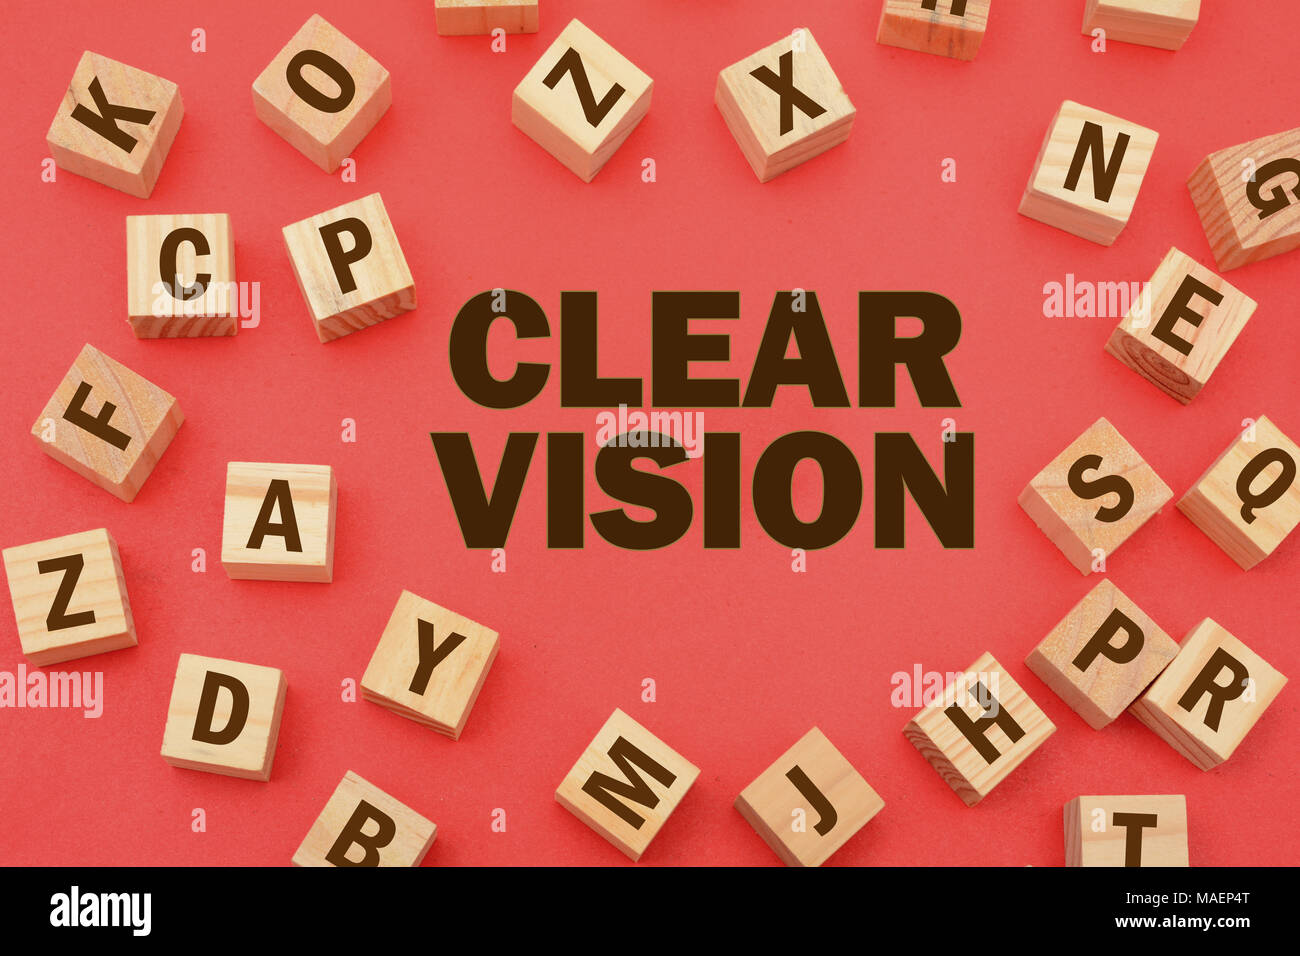 Clear Vision with wooden word blocks scattered around. Stock Photo